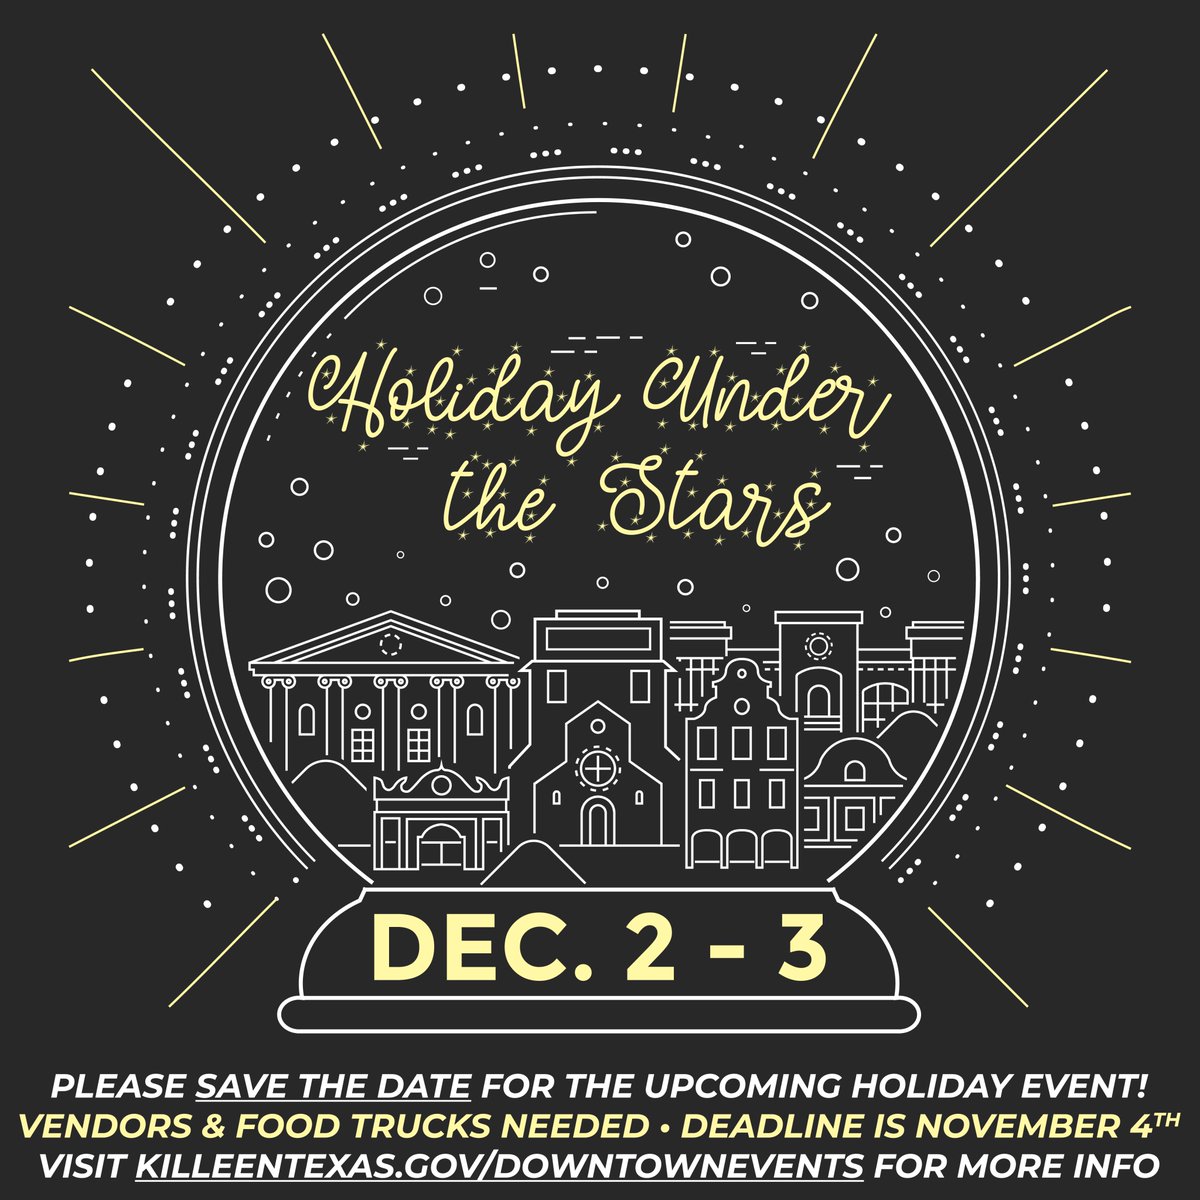 Holiday Under the Stars is the first weekend in December. Our deadline for vendors will be here before you know it and we are taking applications for or both days! This is one of our most popular events and you don't want miss it. Visit killeentexas.gov/HUTS for information.